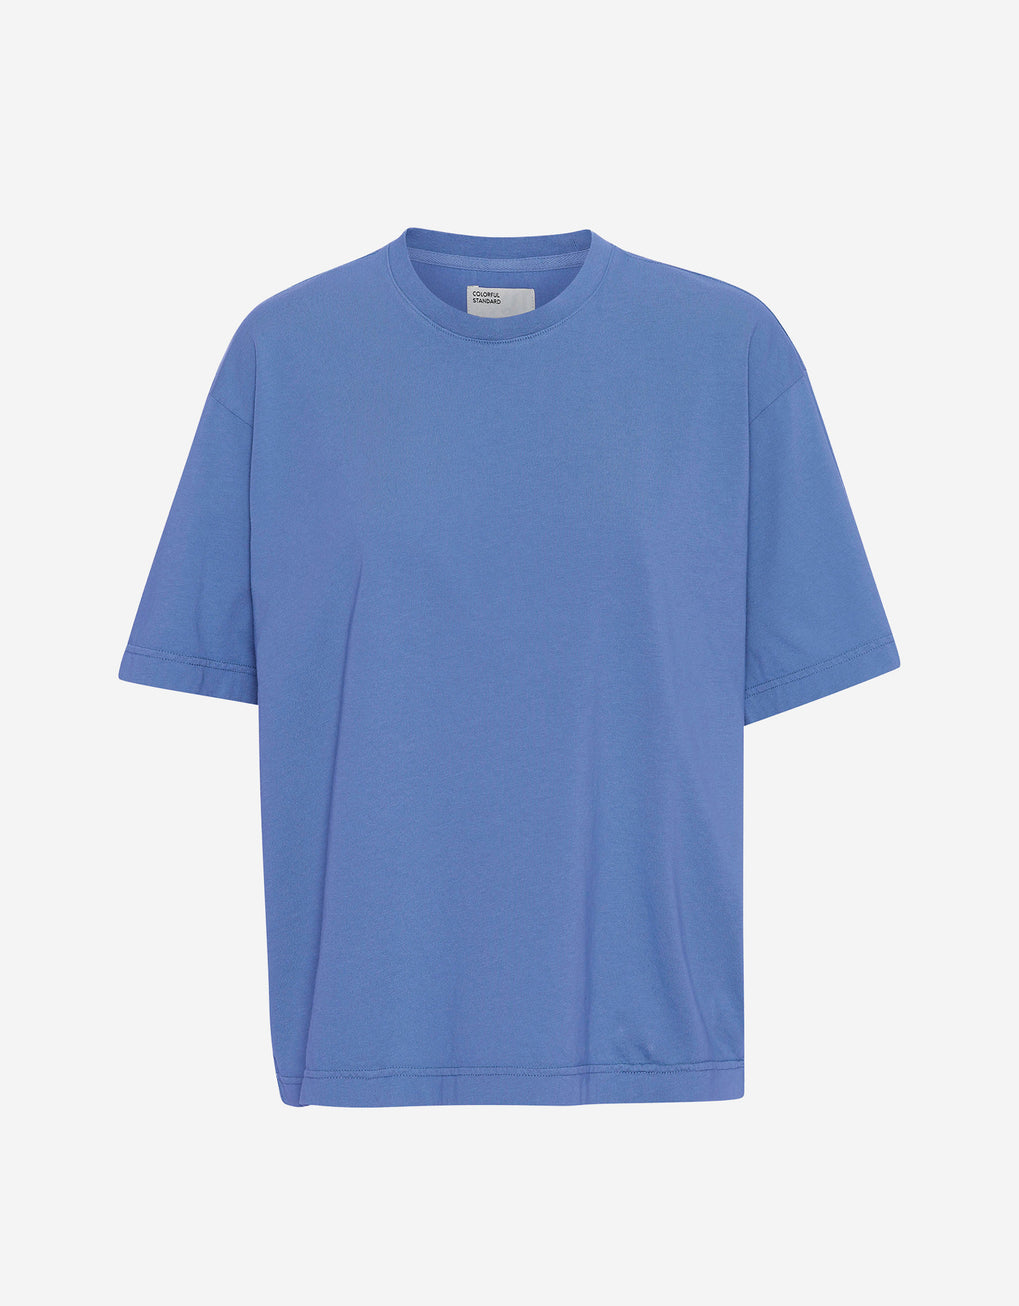 OVERSIZED T-SHIRT BY COLORFUL STANDARD